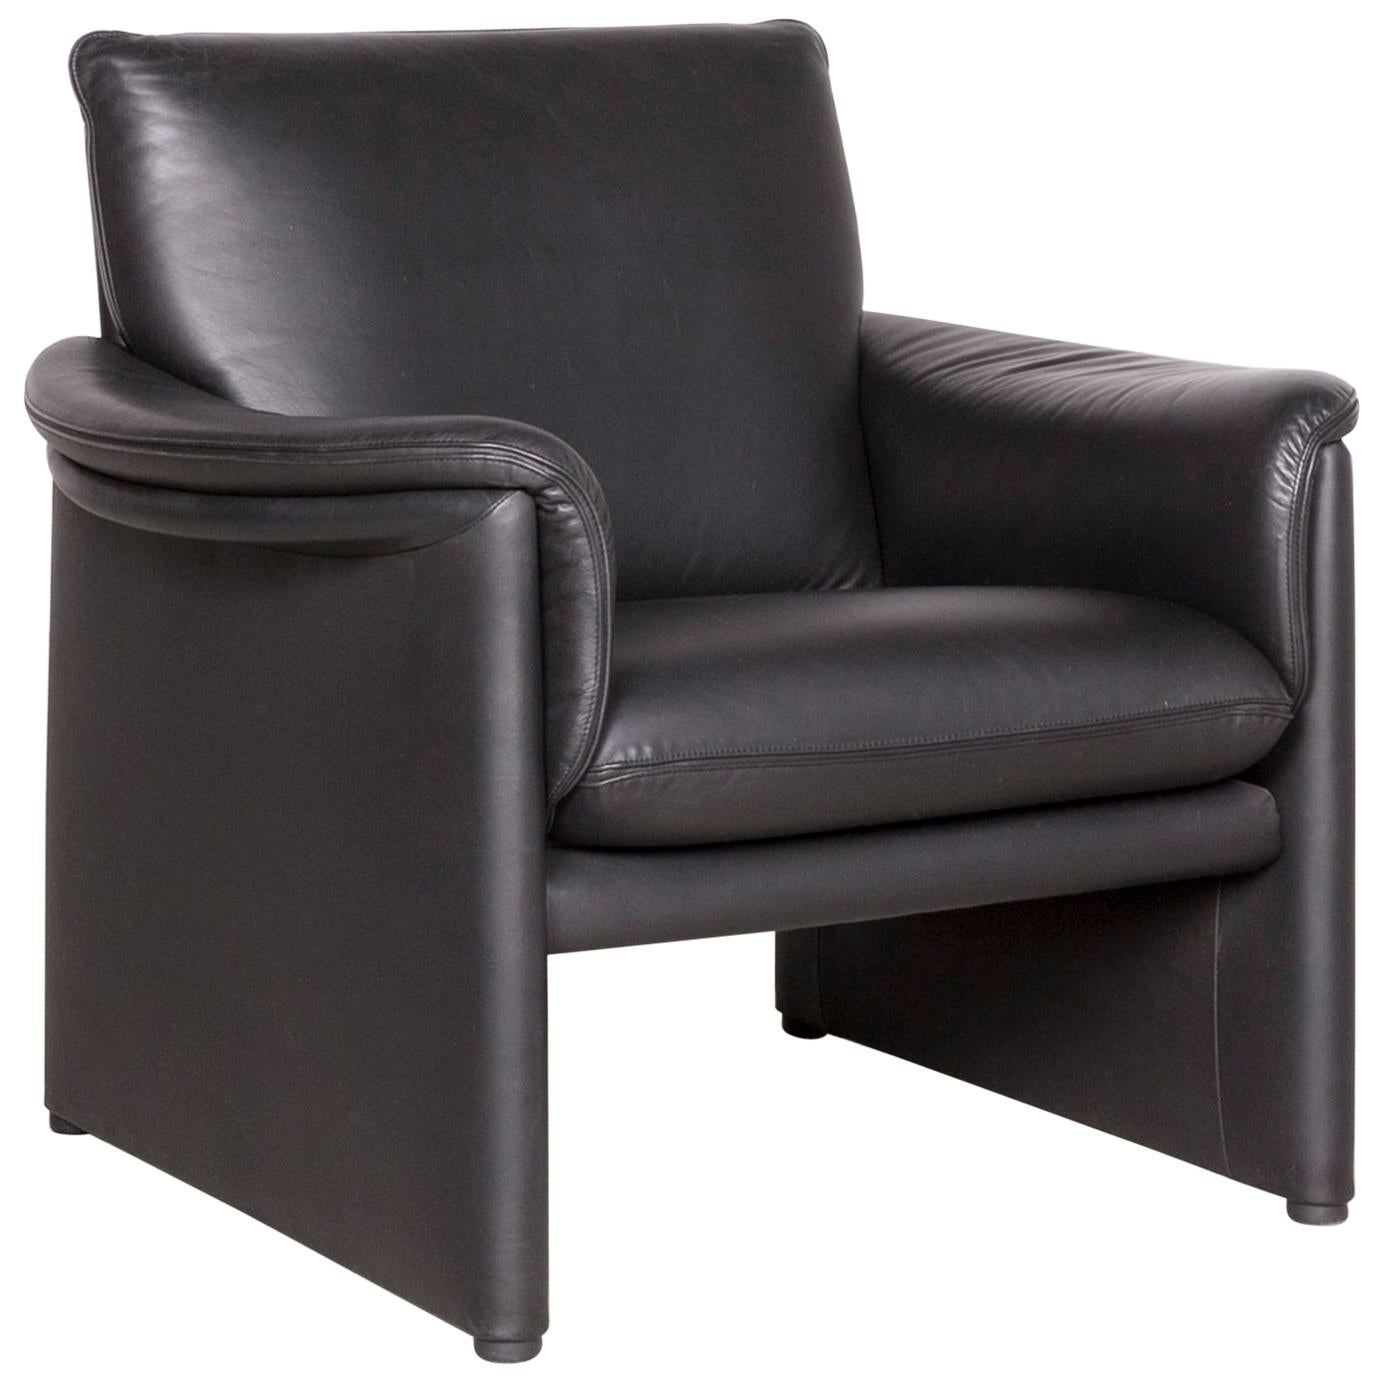 COR Zento Designer Leather Armchair Black Genuine Leather Chair For Sale